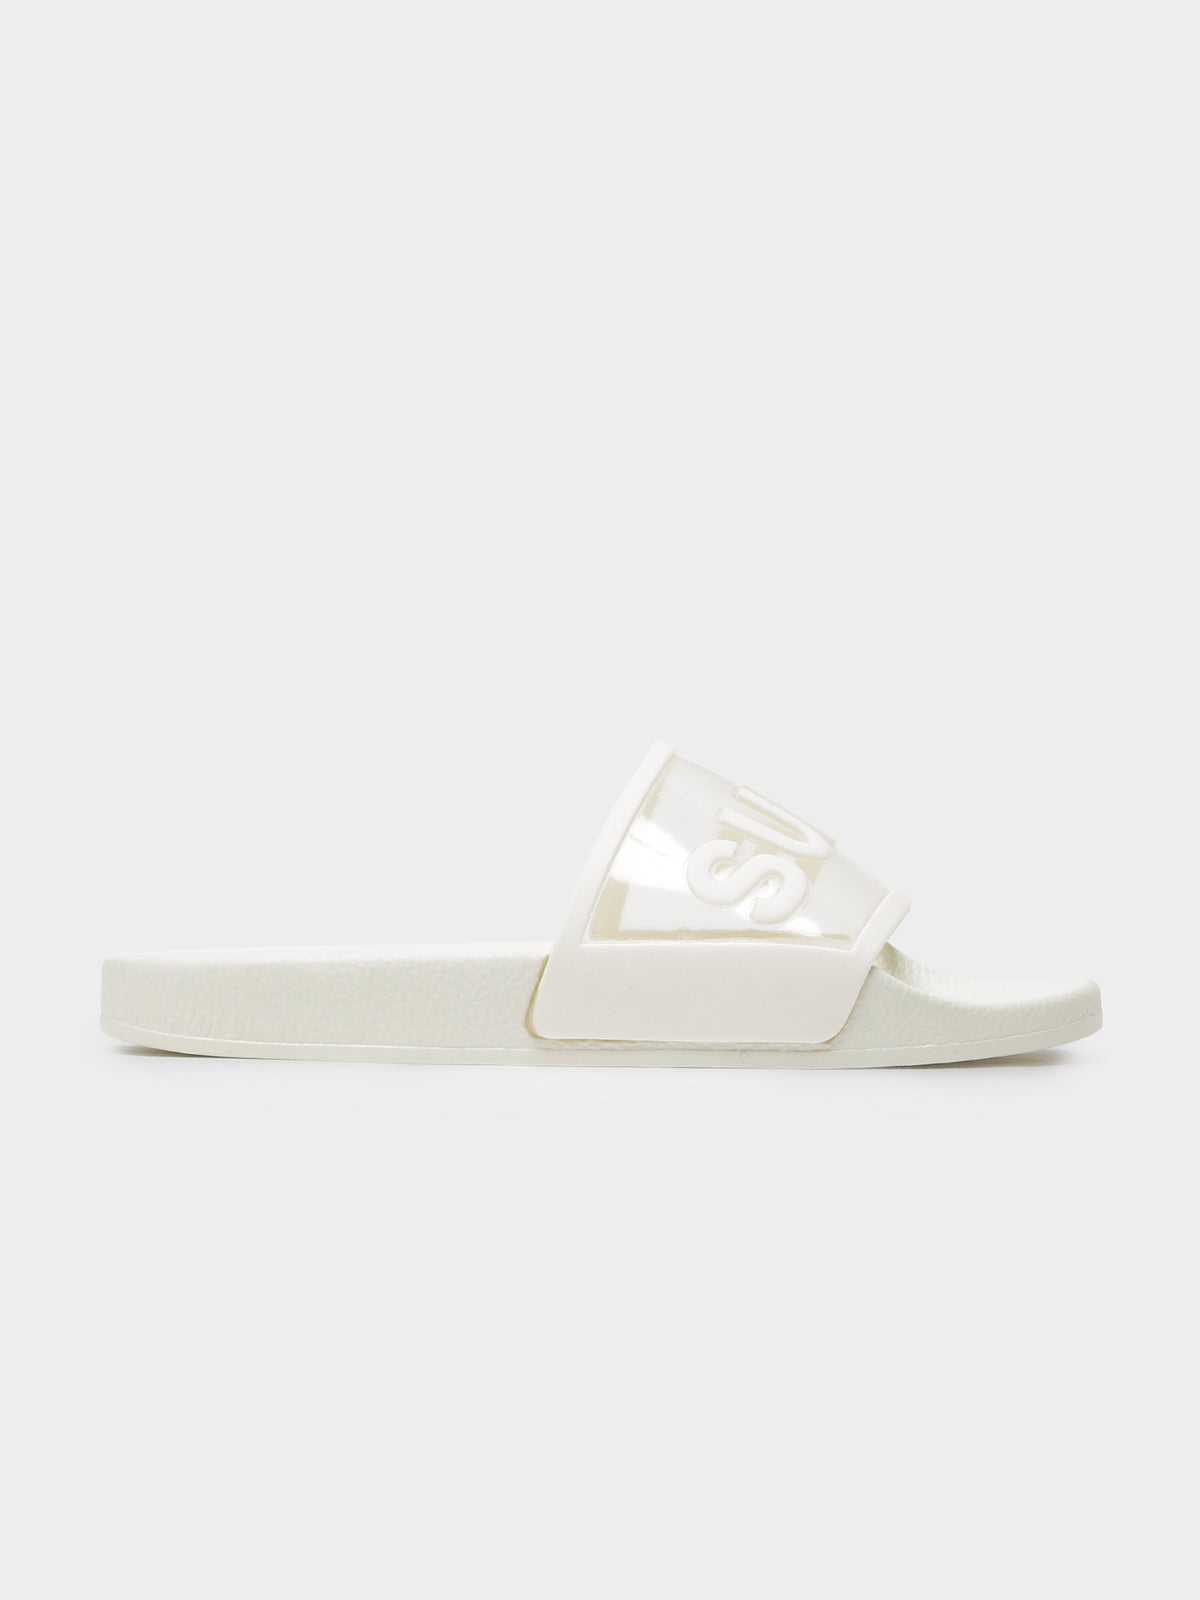 Womens 1908 Slides in Clear Blue